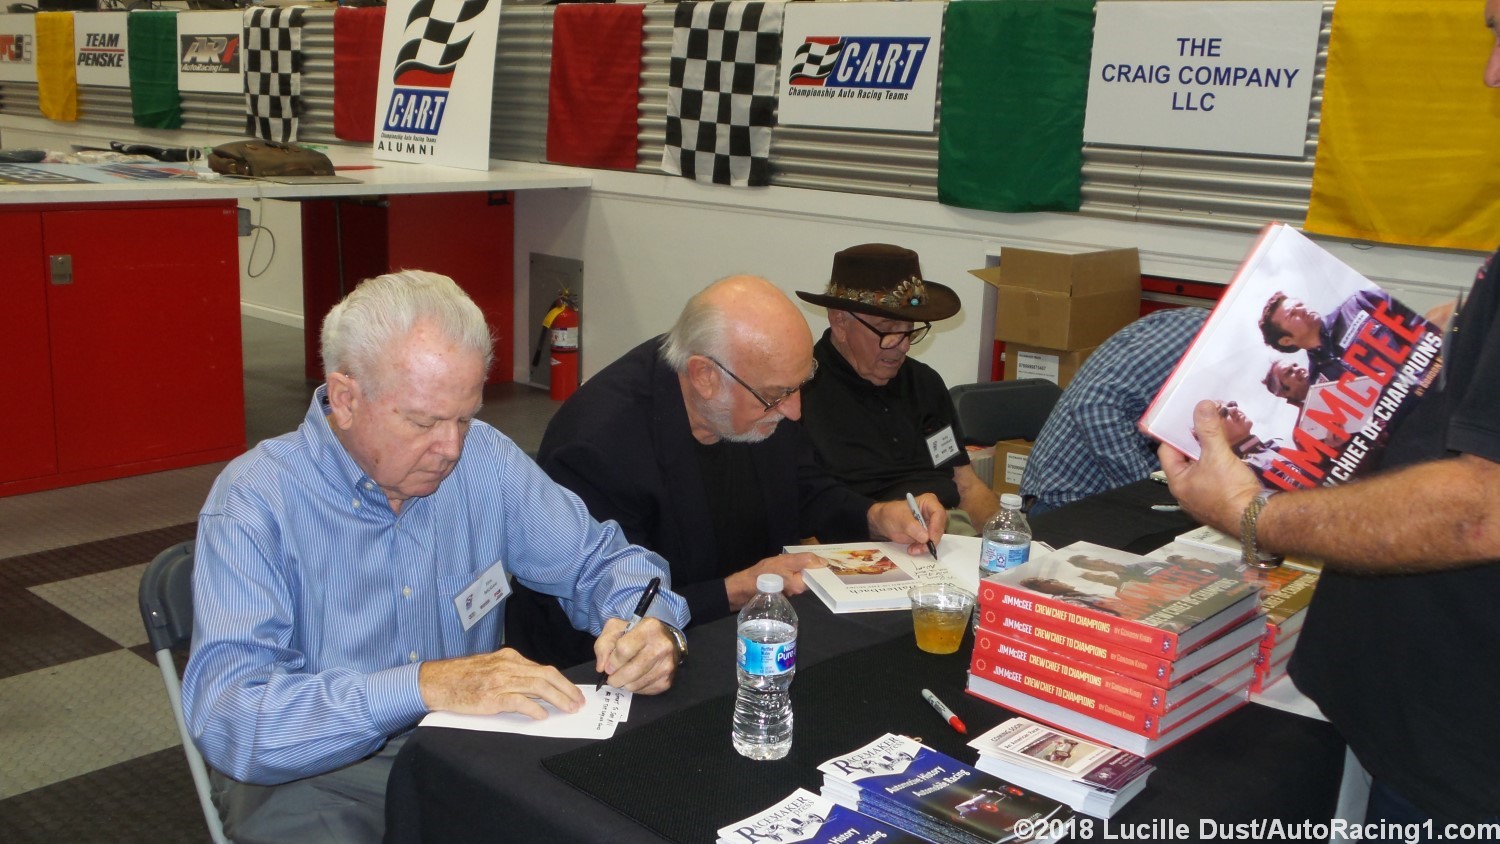 Dallenbach and McGee book signing